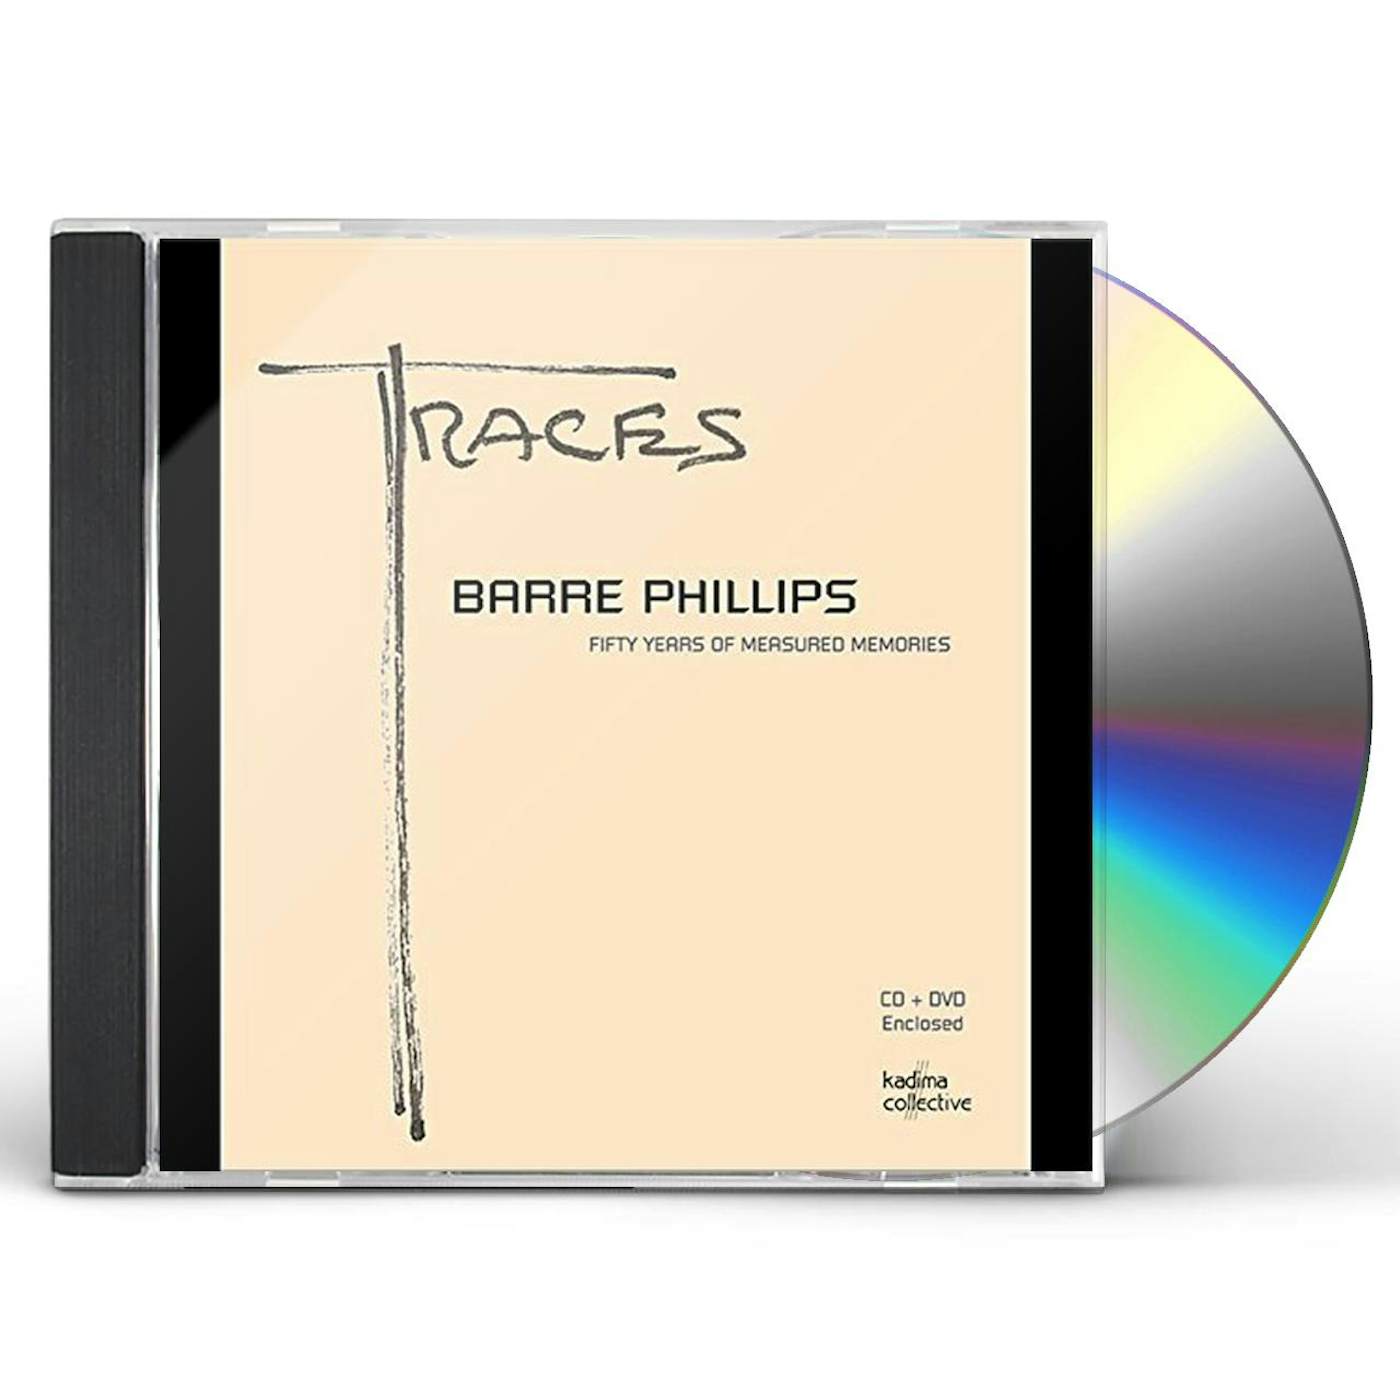 Barre Phillips TRACES CD